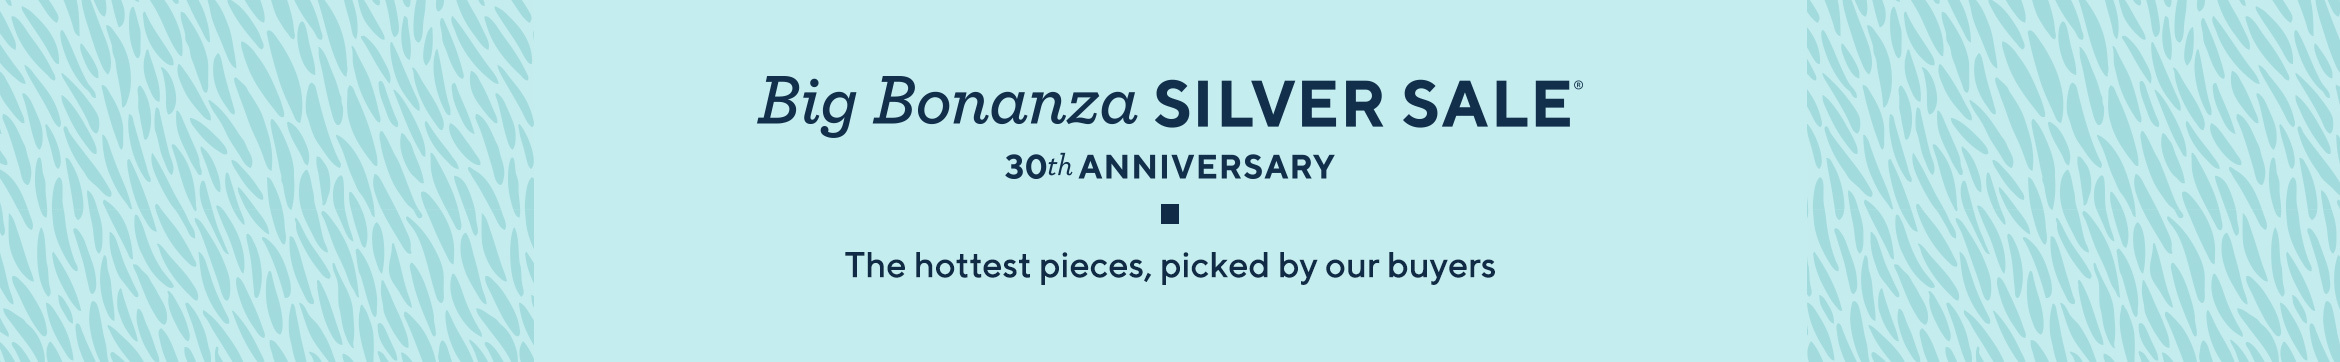 Big Bonanza Silver Sale  30th Anniversary. The hottest pieces, picked by our buyers